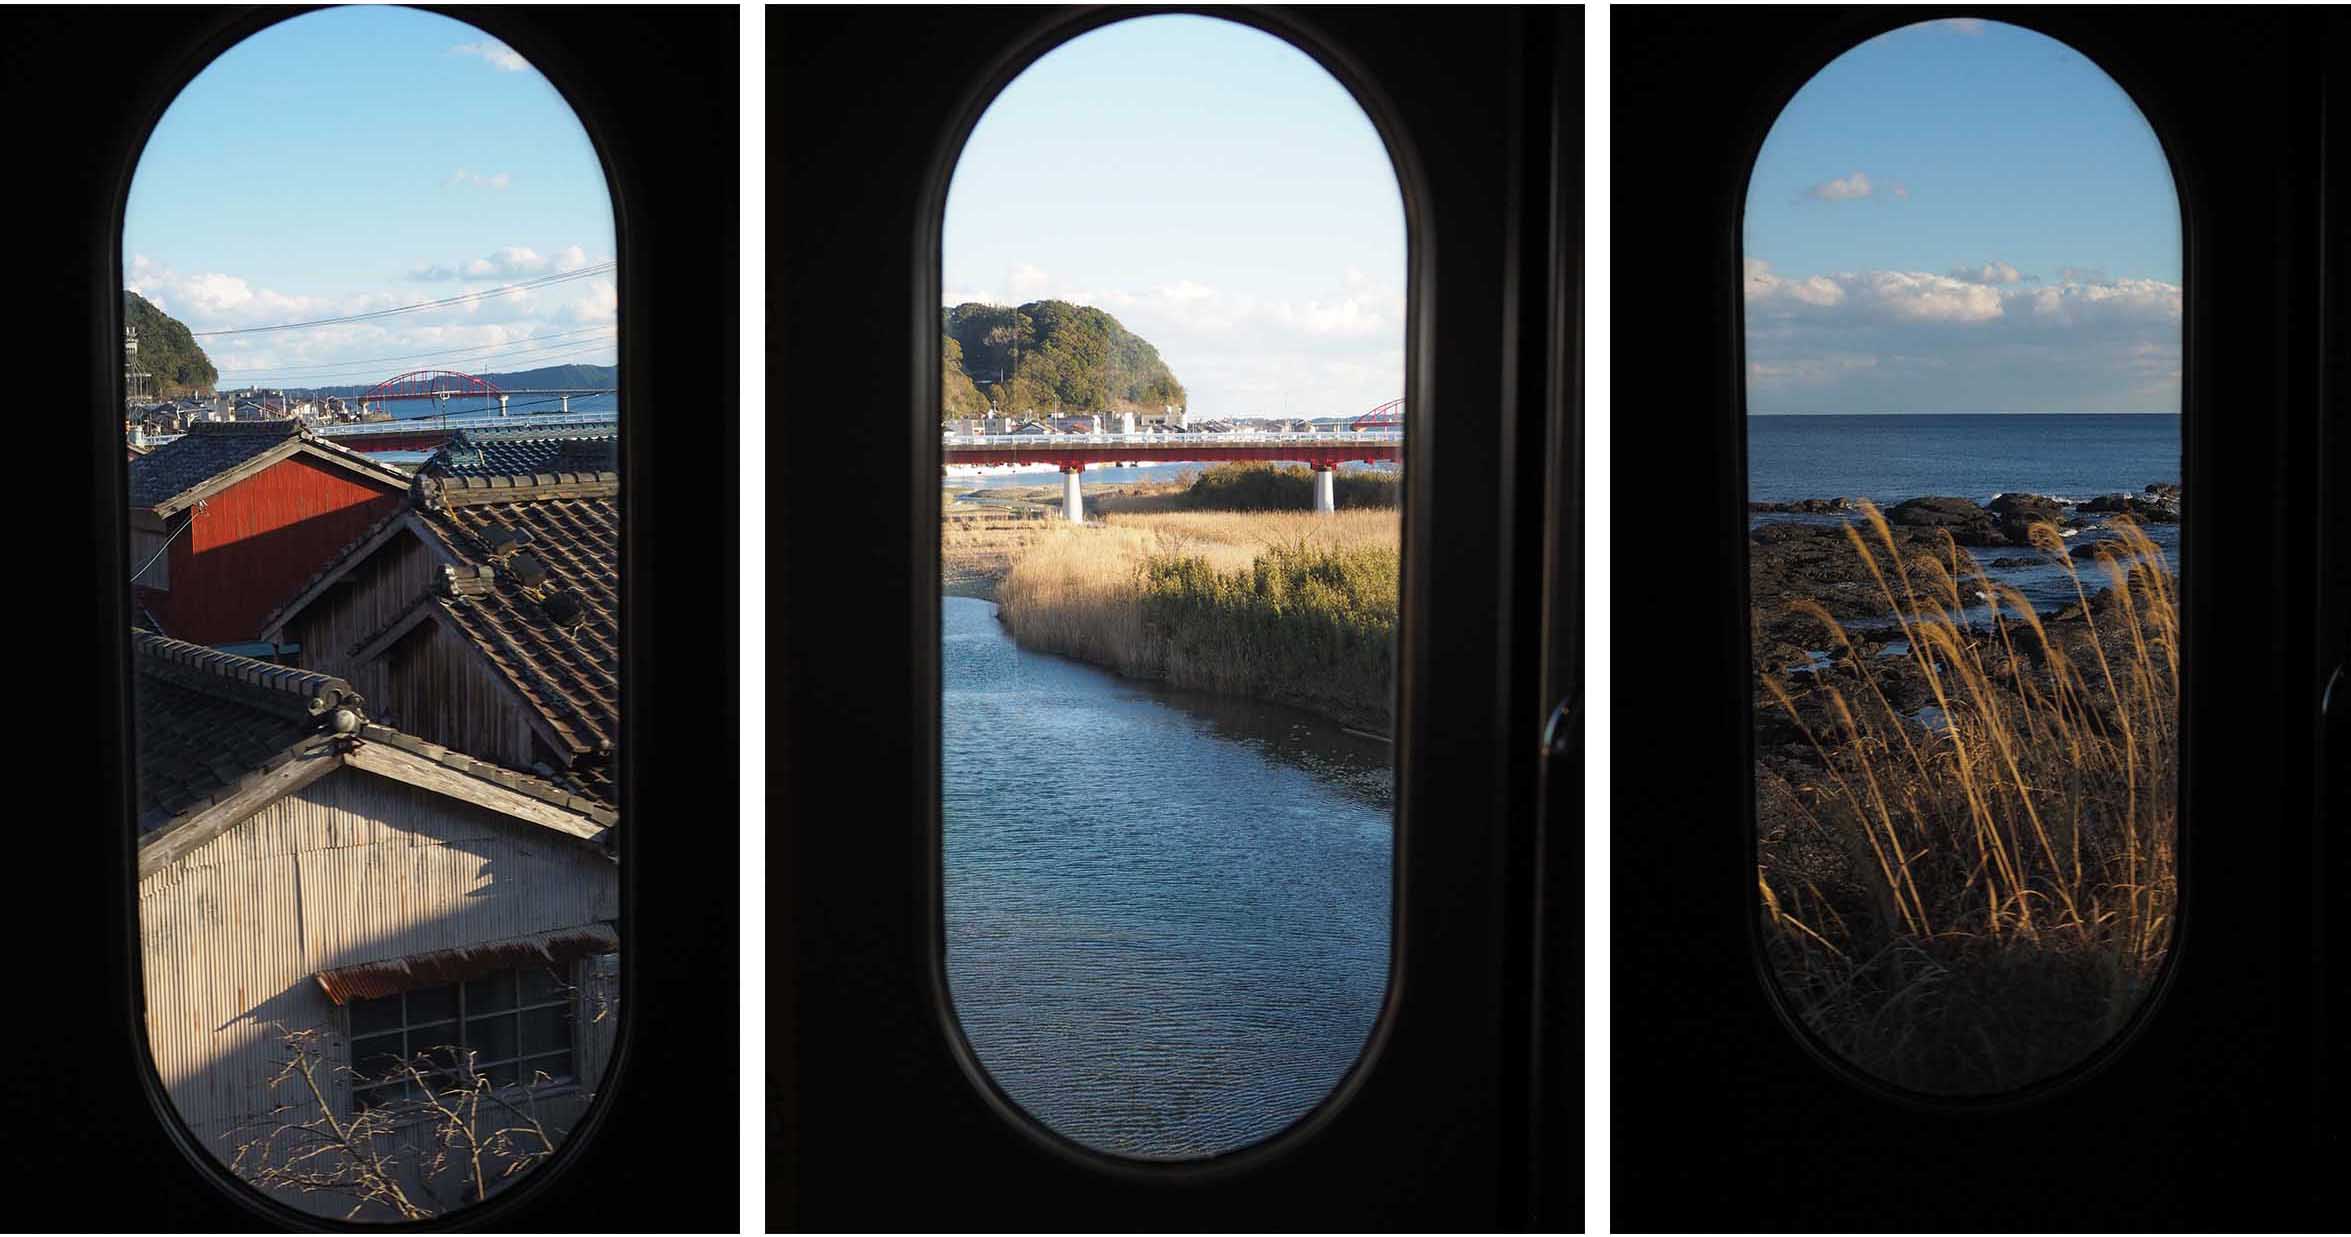 The moving windows, train ride through in central Japan.